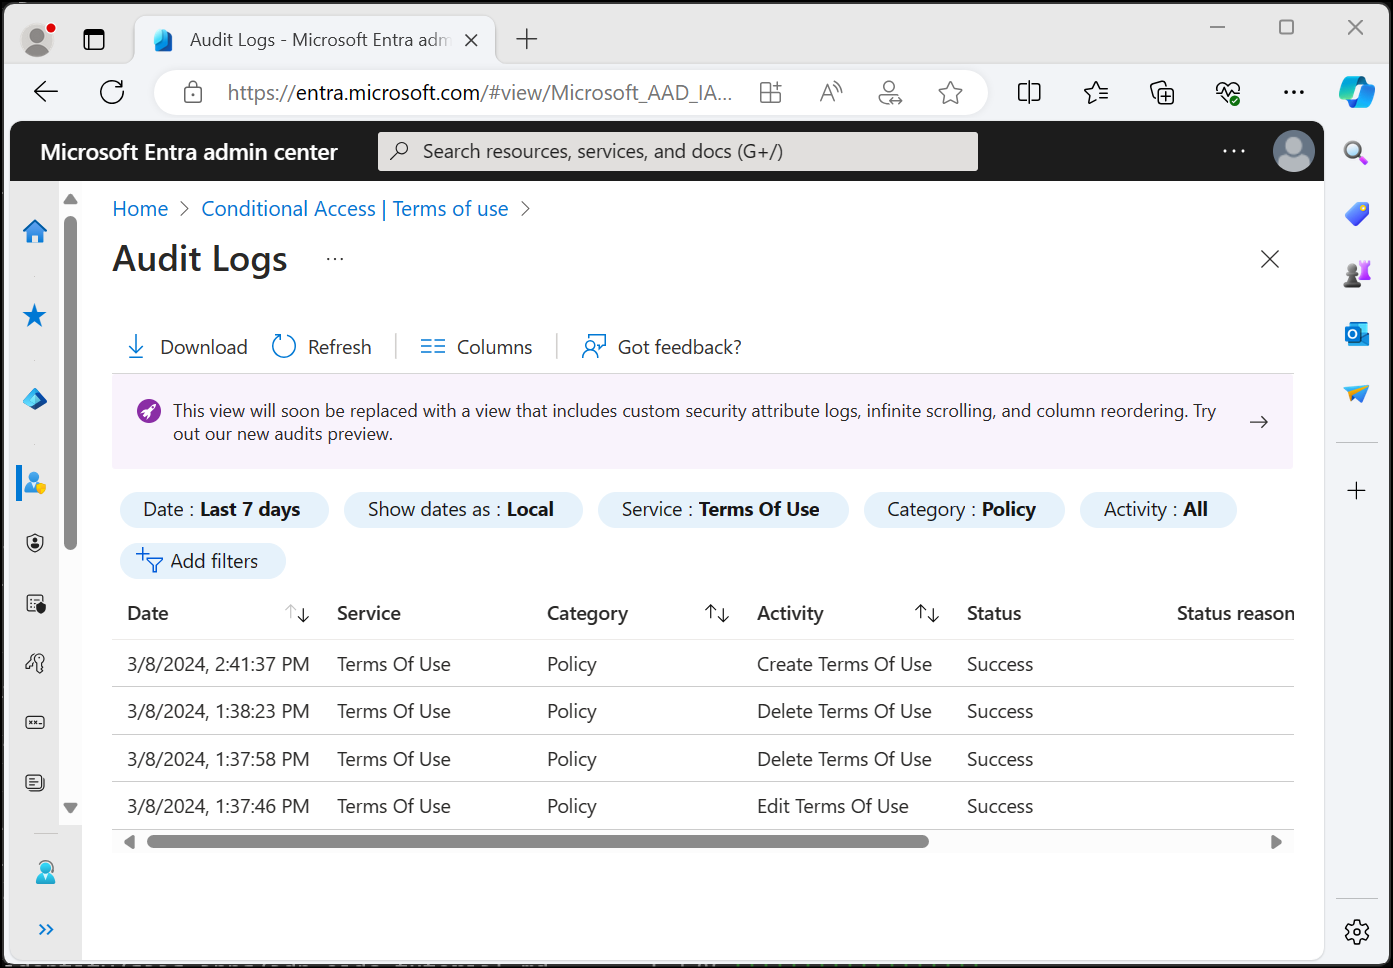 A screenshot showing the Microsoft Entra audit logs screen listing date, target policy, initiated by, and activity.